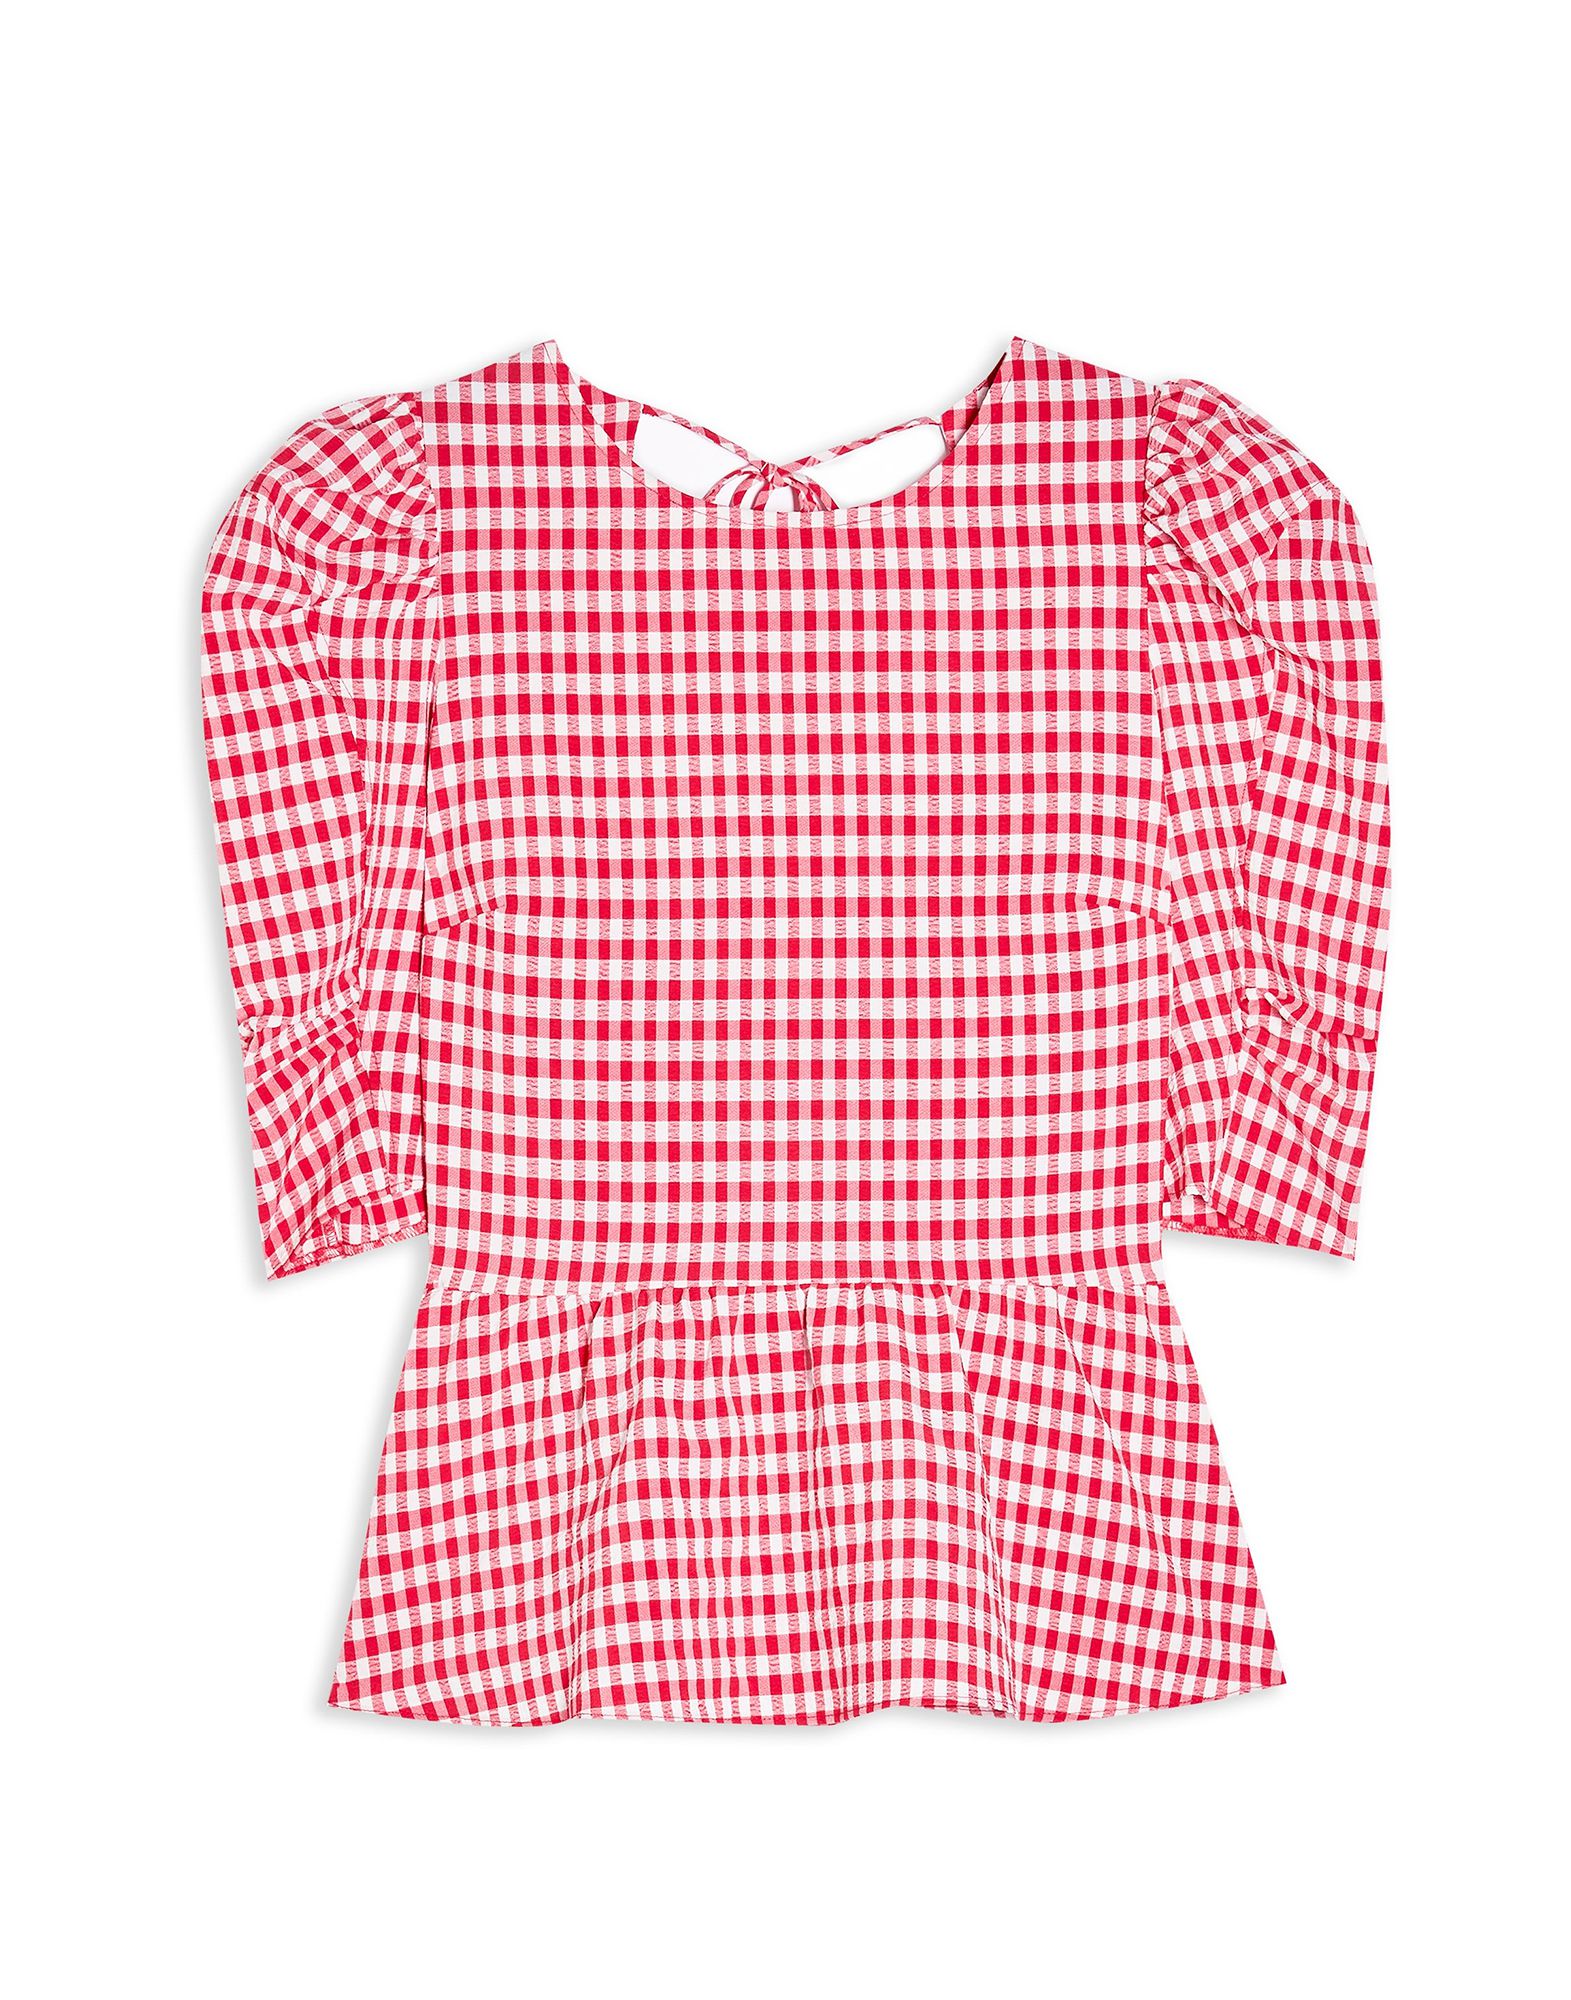 ＜YOOX＞ ★64%OFF！TOPSHOP レディース ブラウス レッド 10 ポリエステル 98% / ポリウレタン 2% RED GINGHAM LACE UP PUFF SLEEVE BLOUSE画像